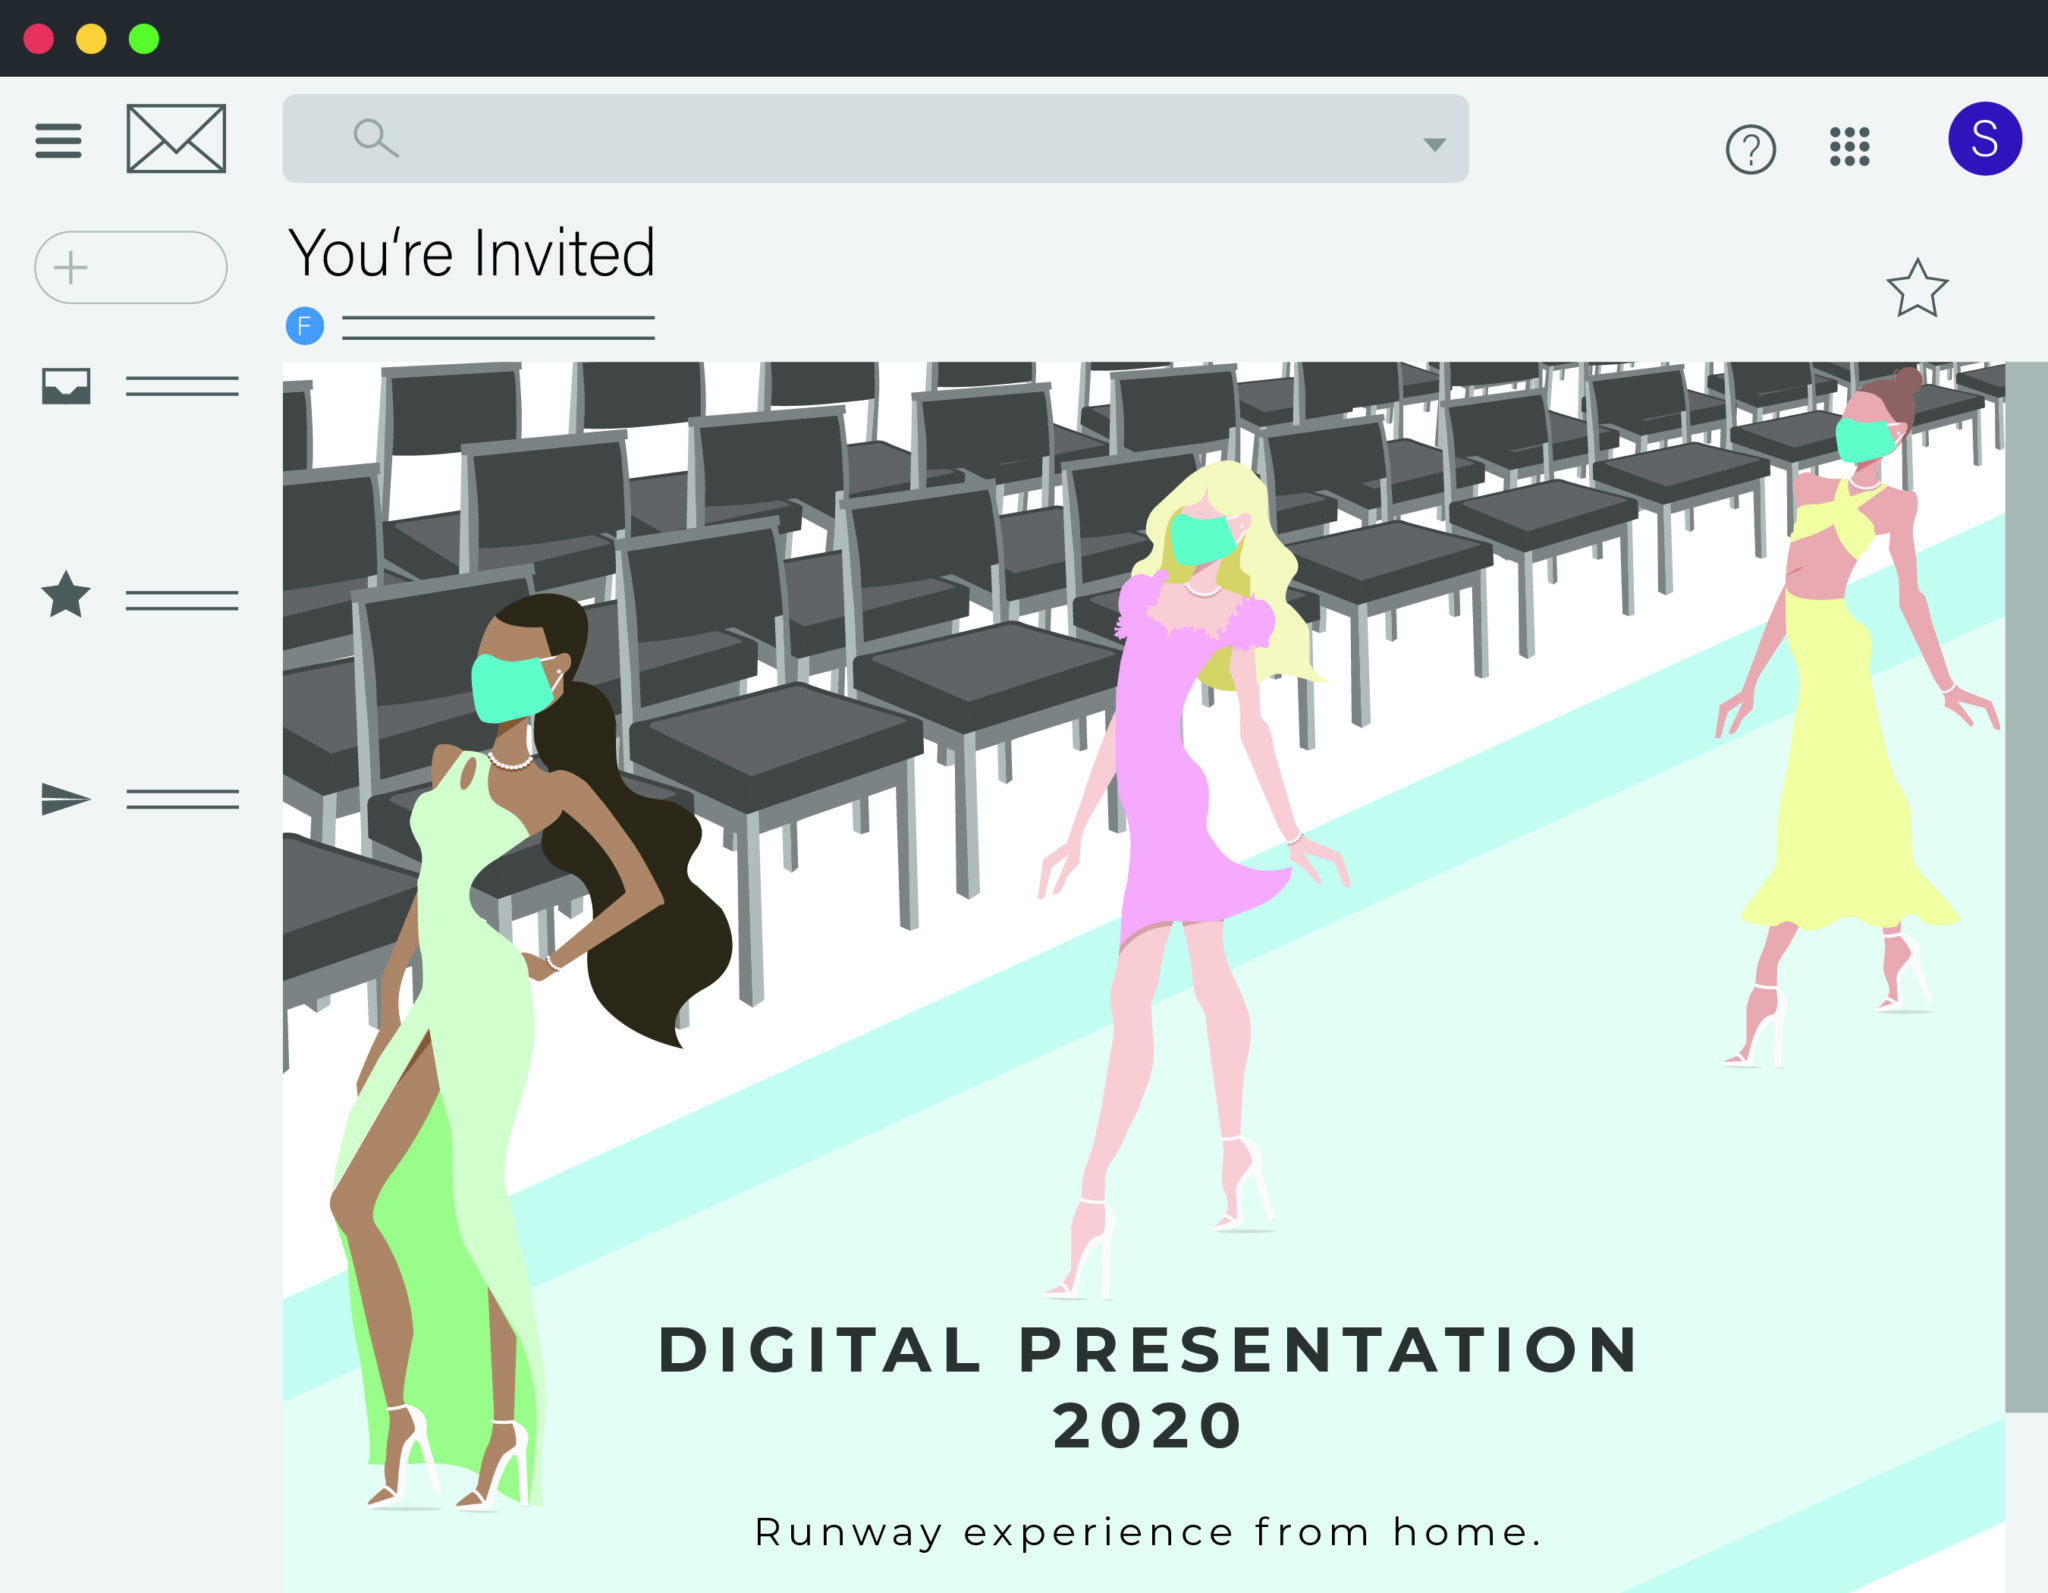 Illustration of a fashion show invite; three models on the runway wearing face masks, with text “DIGITAL PRESENTATION 2020, Runway experience from home”